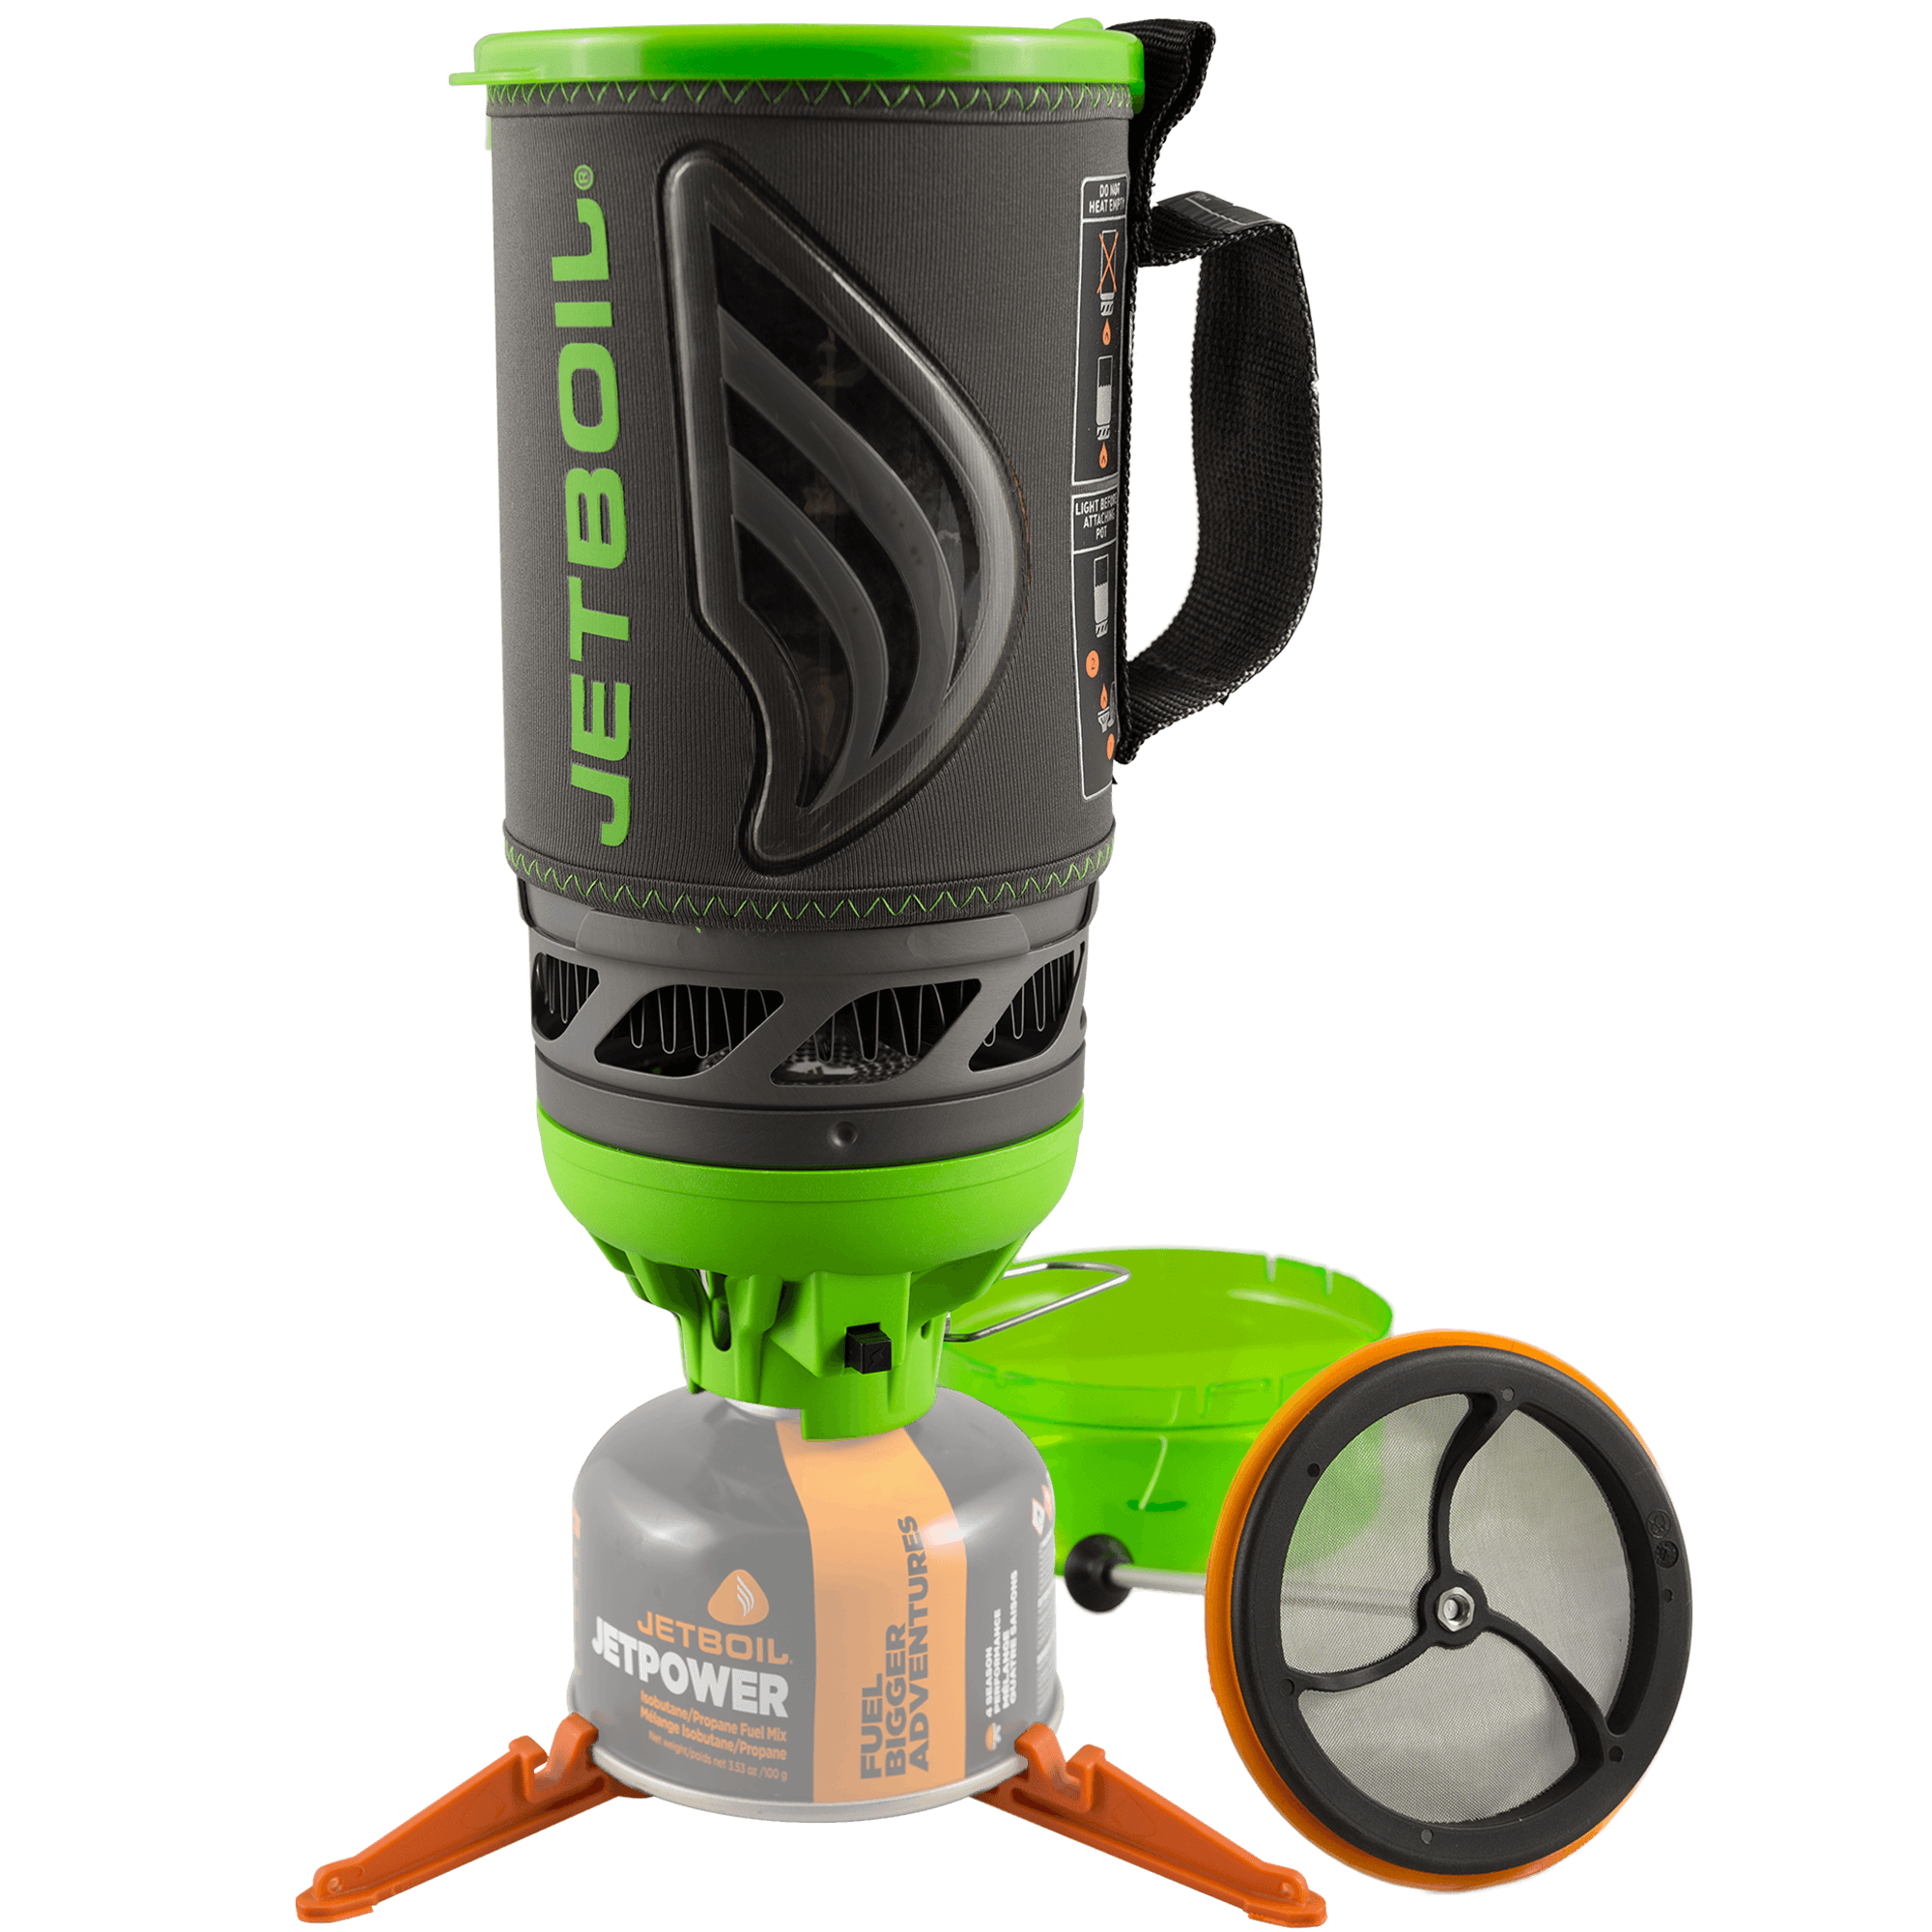 Buying Guide | Jetboil